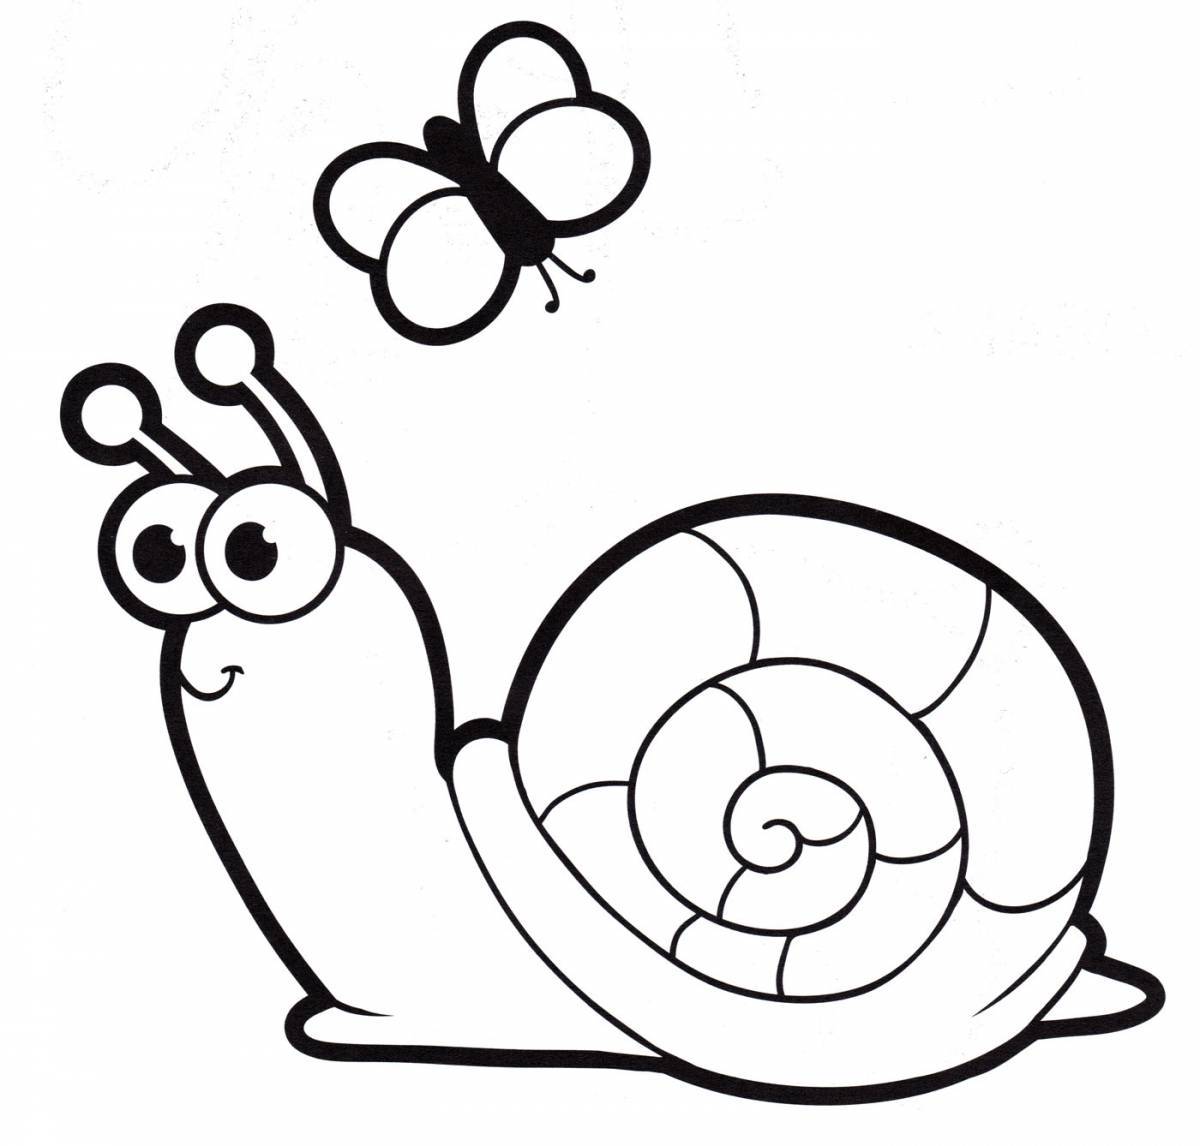 Attractive snail coloring for kids